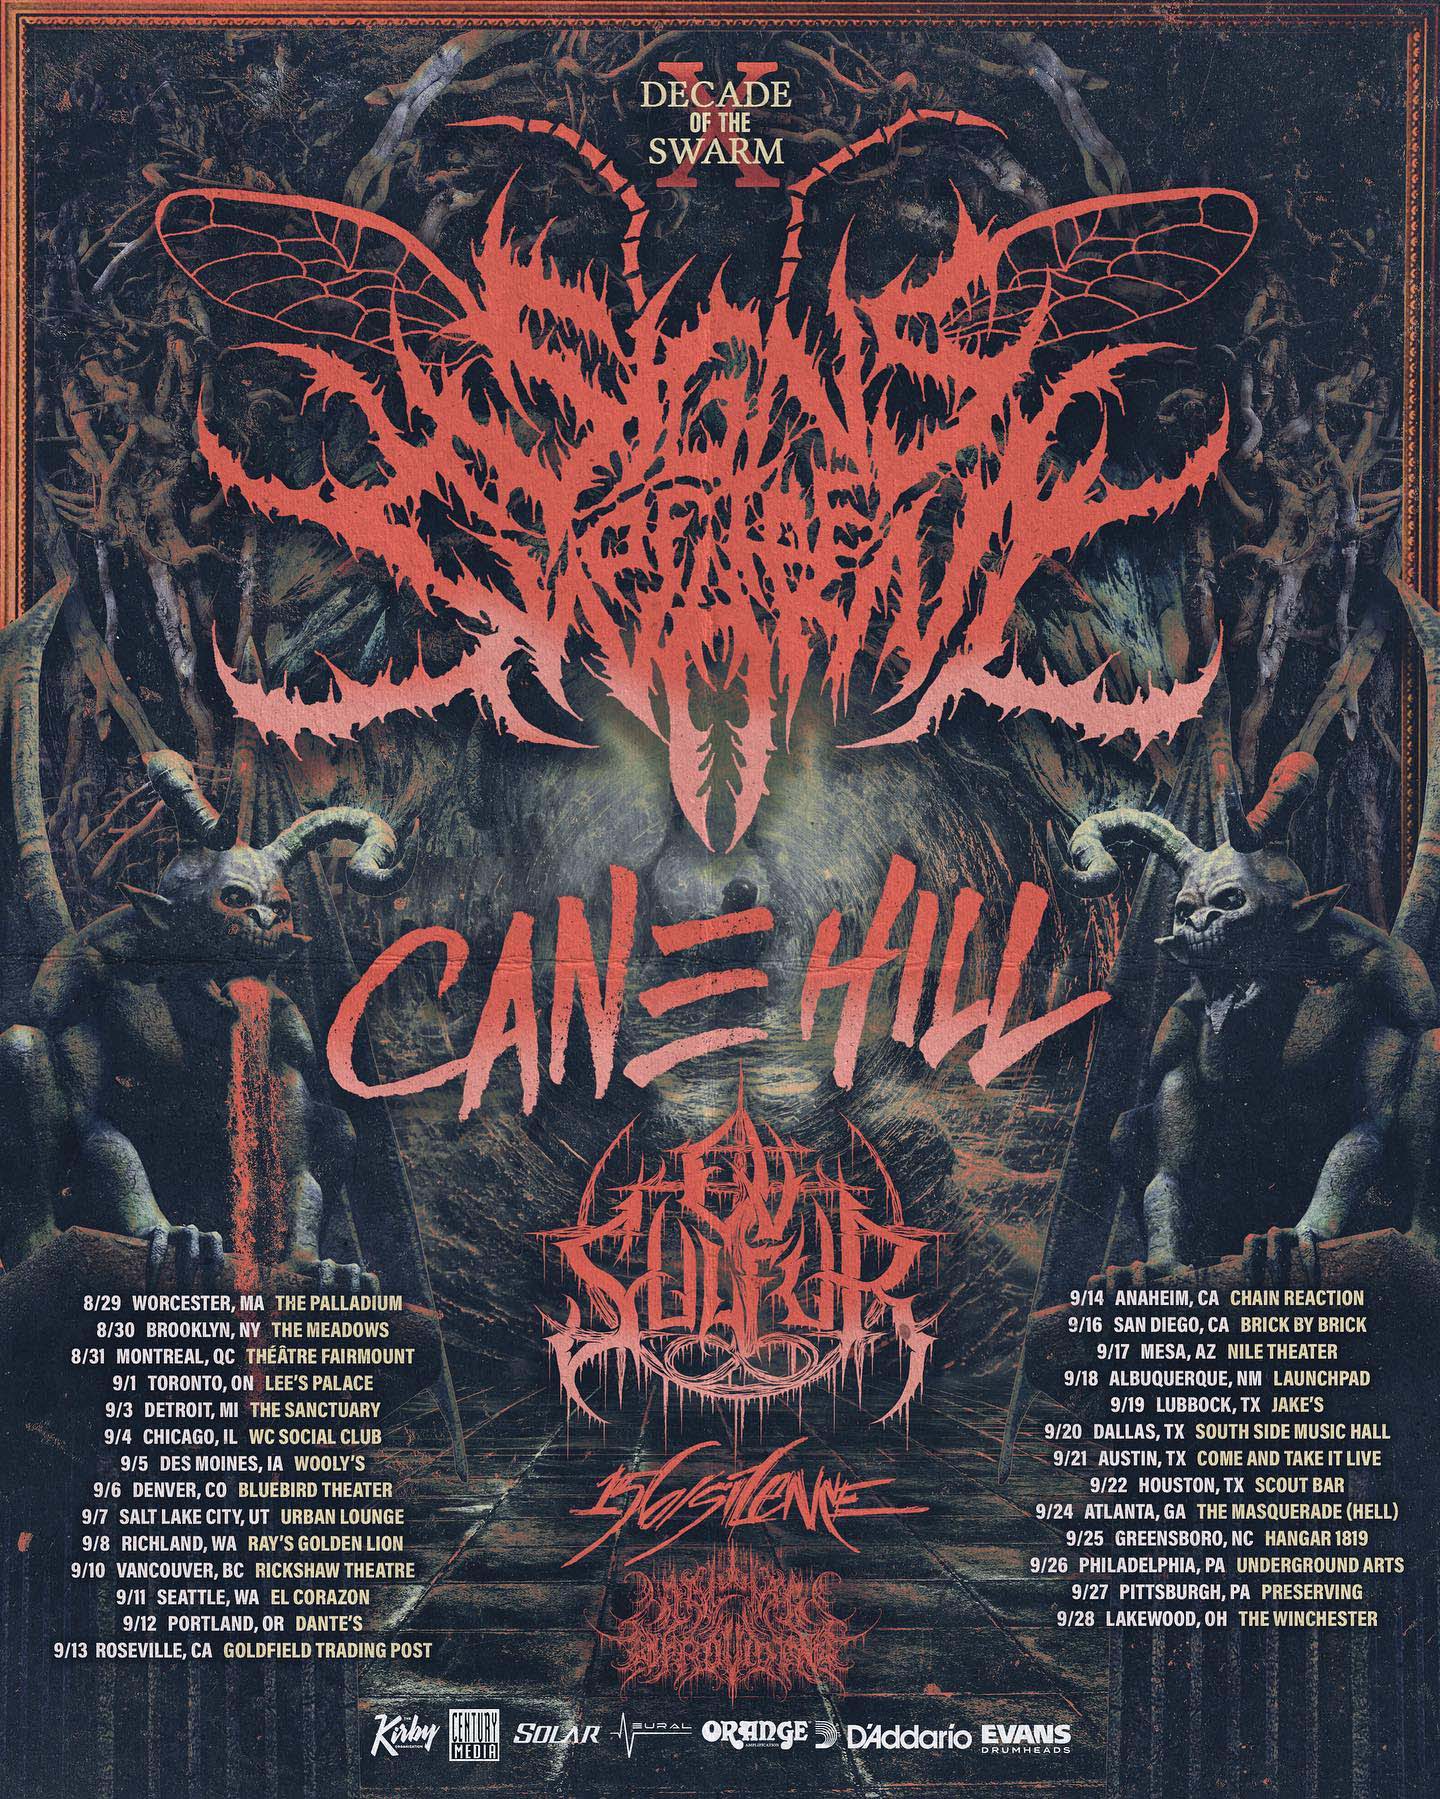 Signs of the Swarm, Cane Hill, Ov Sulfur, 156/Silence, A Wake In Providence